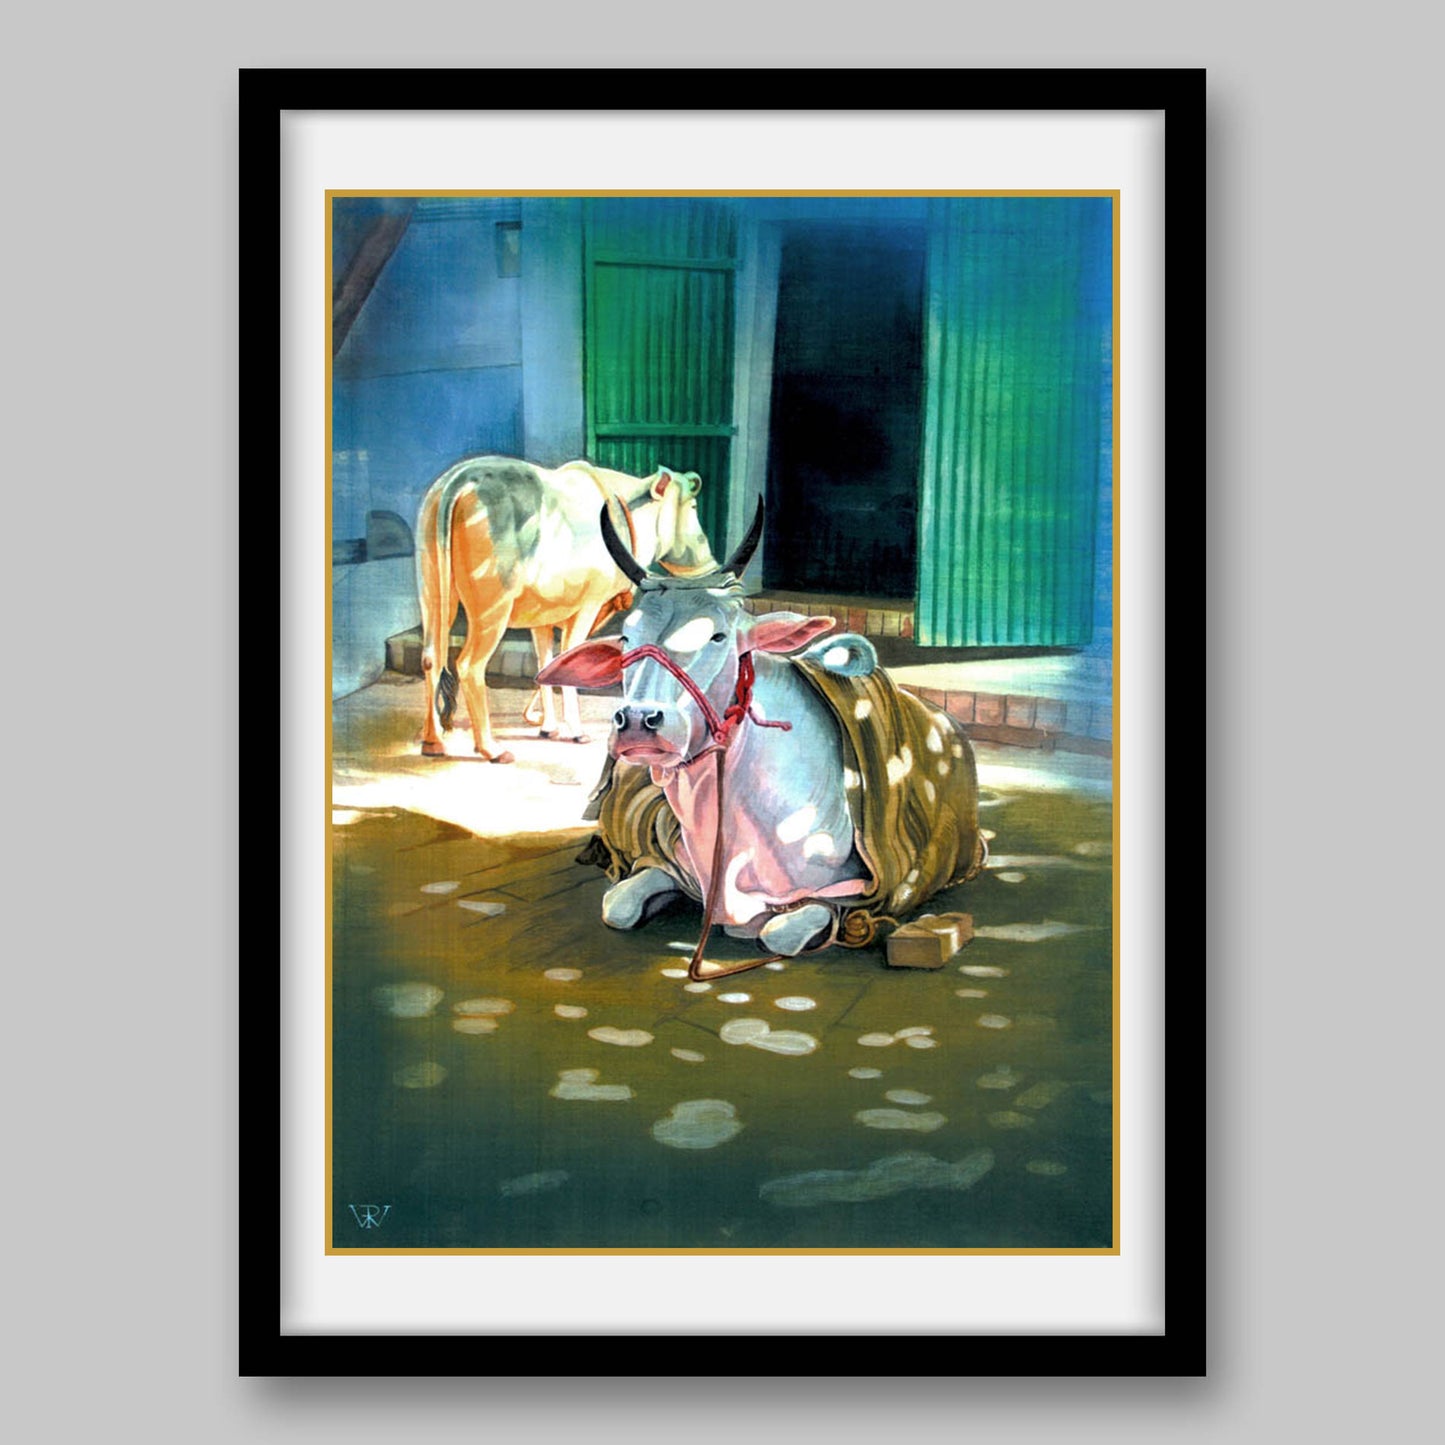 Sacred Cows - High Quality Print of Artwork by Pieter Weltevrede